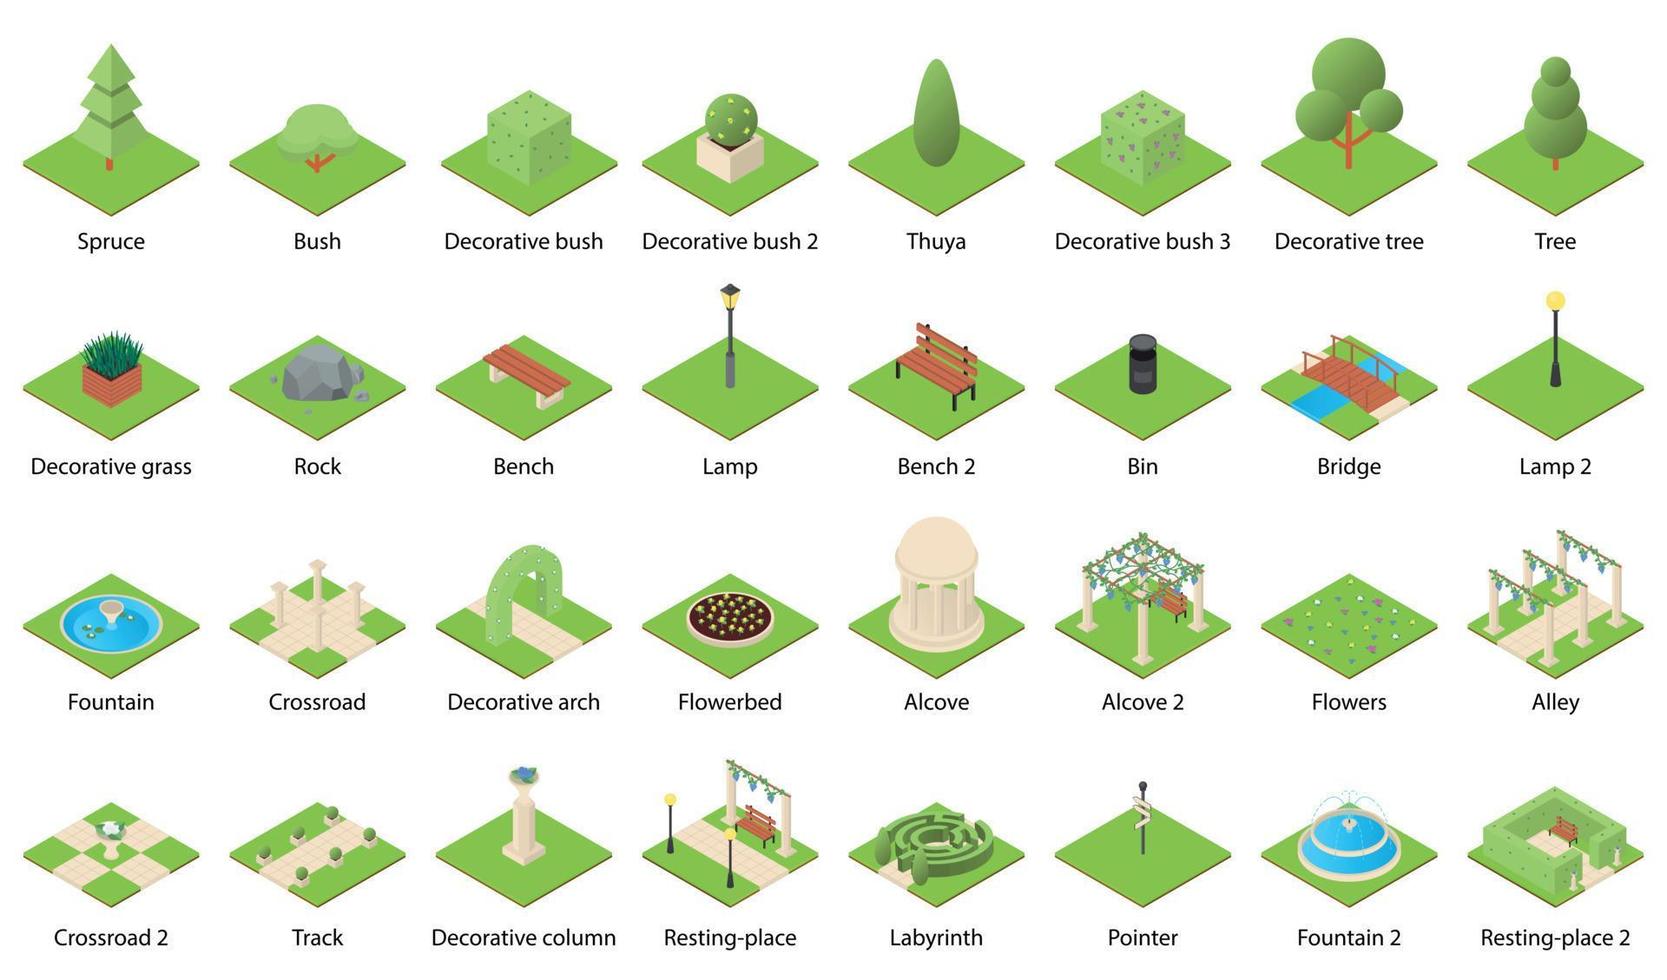 Park nature elements icons set, isometric style vector